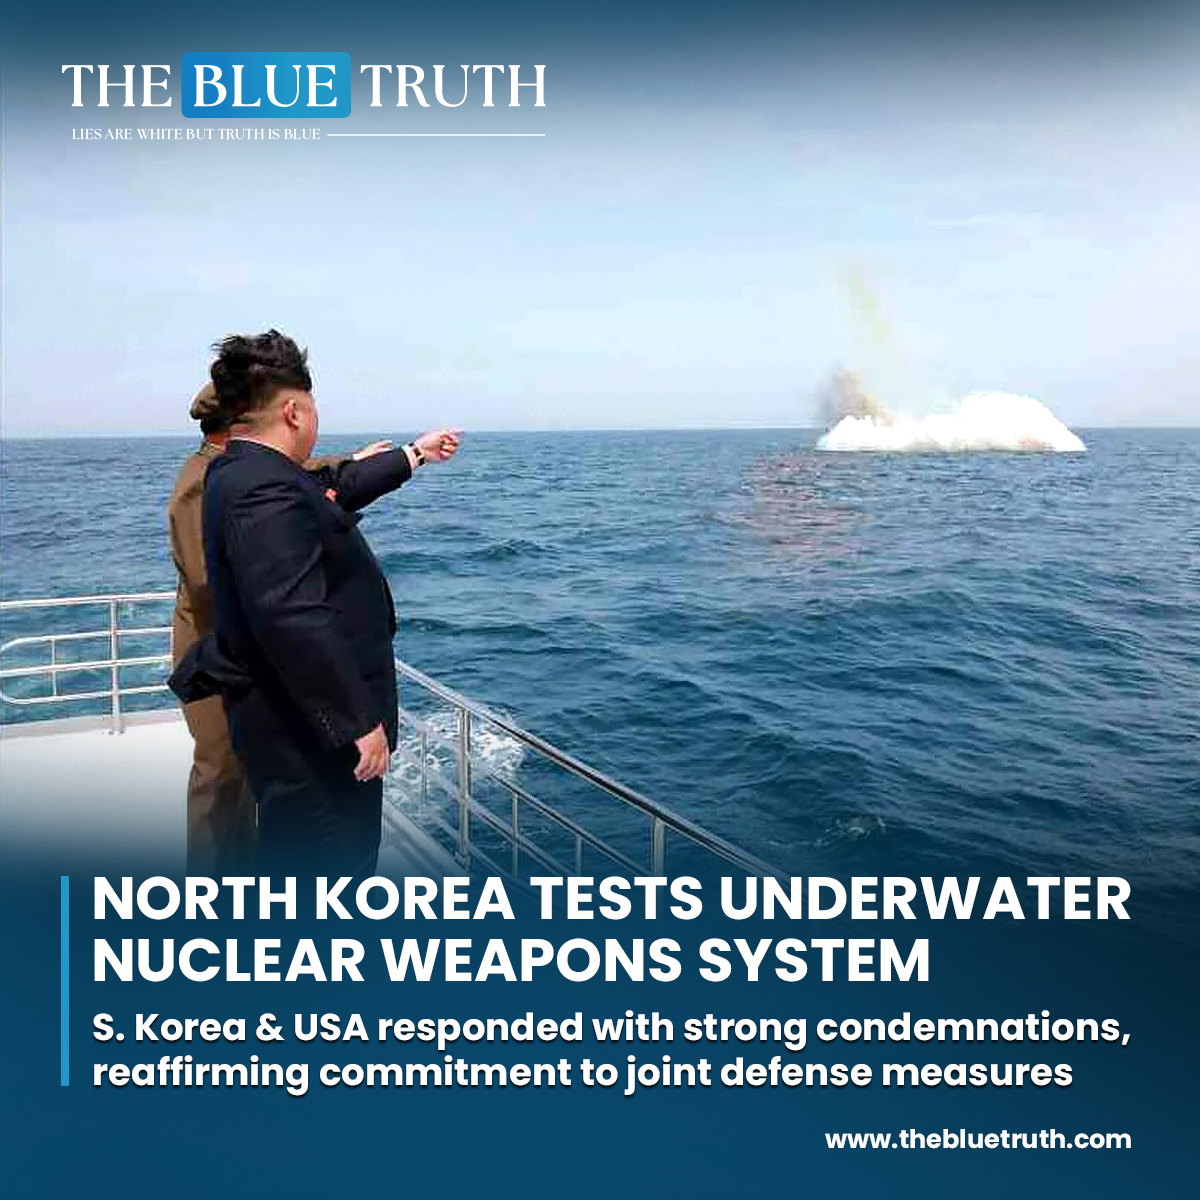 North Korea conducted a test of its underwater nuclear weapons system, known as the 'Haeil-5-23,'
#NorthKorea #NuclearWeapons #UnderwaterTesting #NationalSecurity
#MilitaryDevelopment #NuclearDeterrence #Geopolitics #tbt #TheBlueTruth